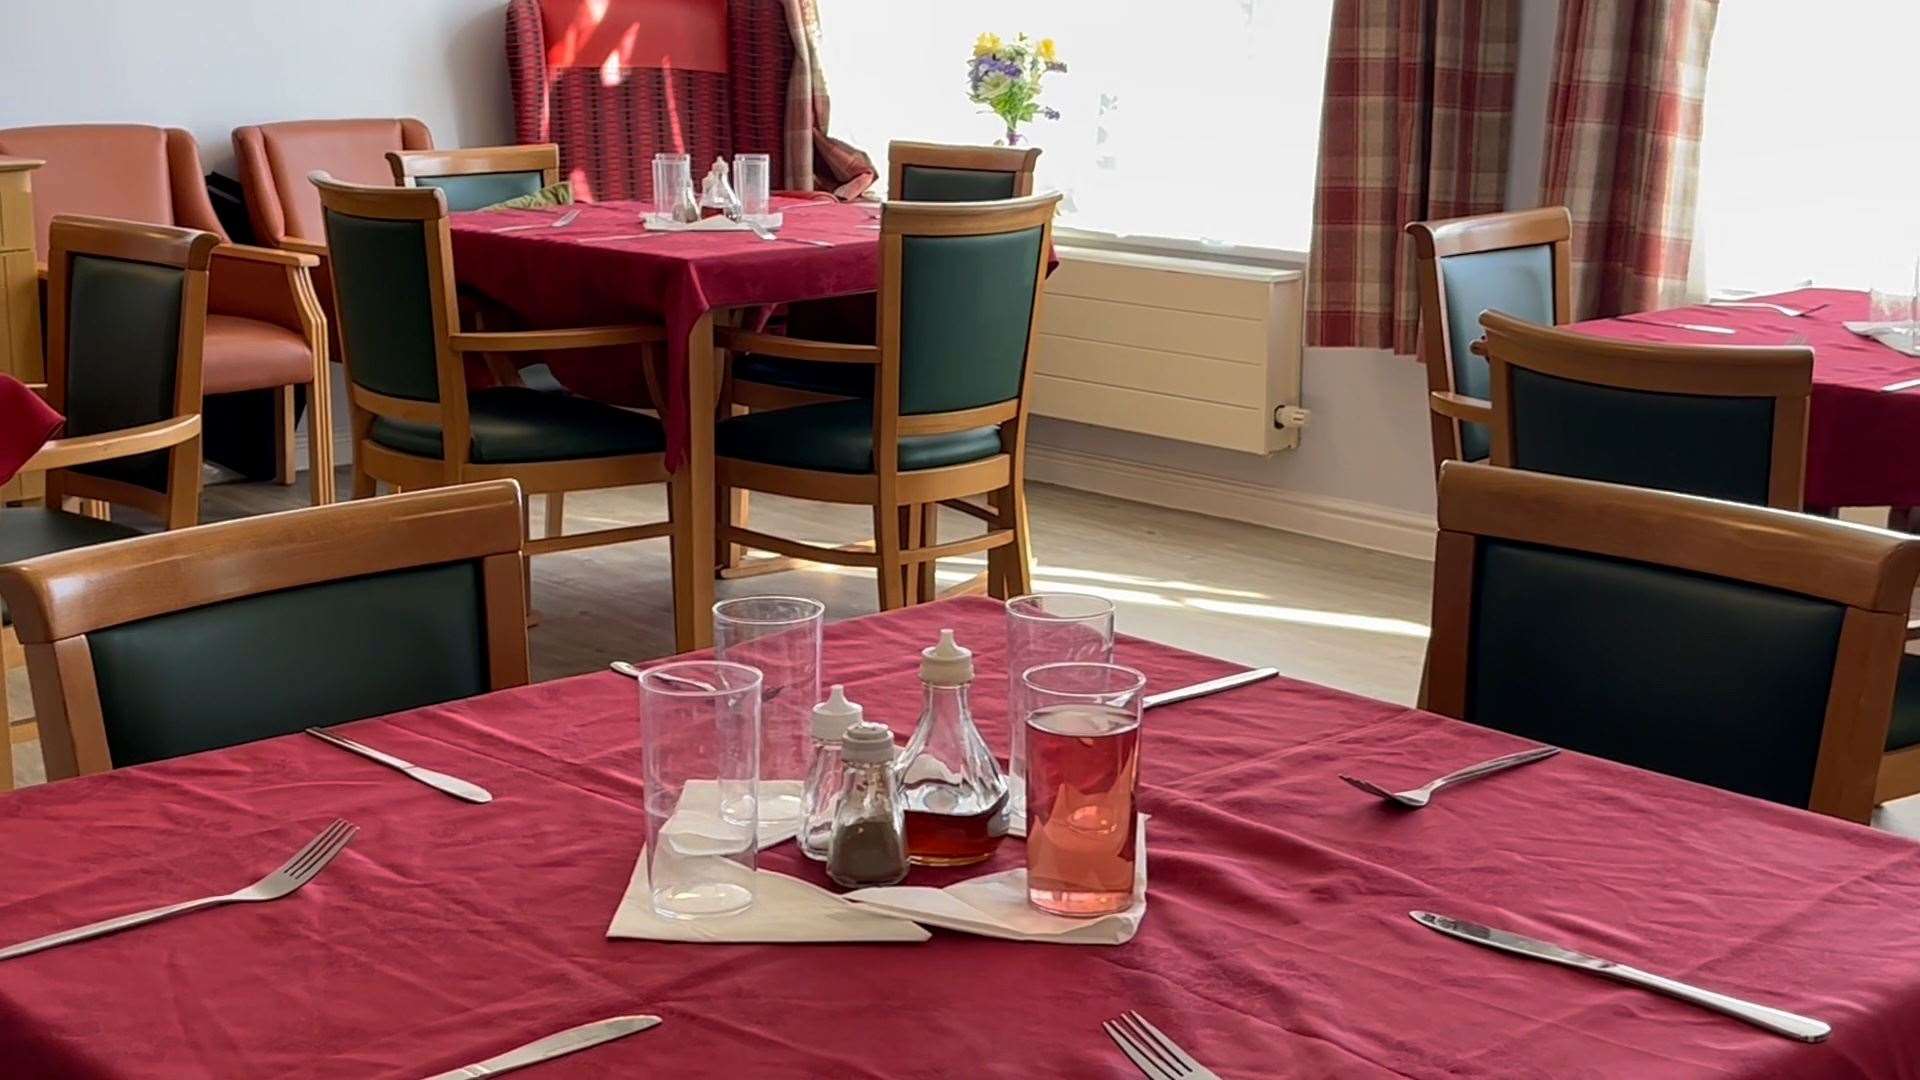 A dining area at the home where residents can sit and chat